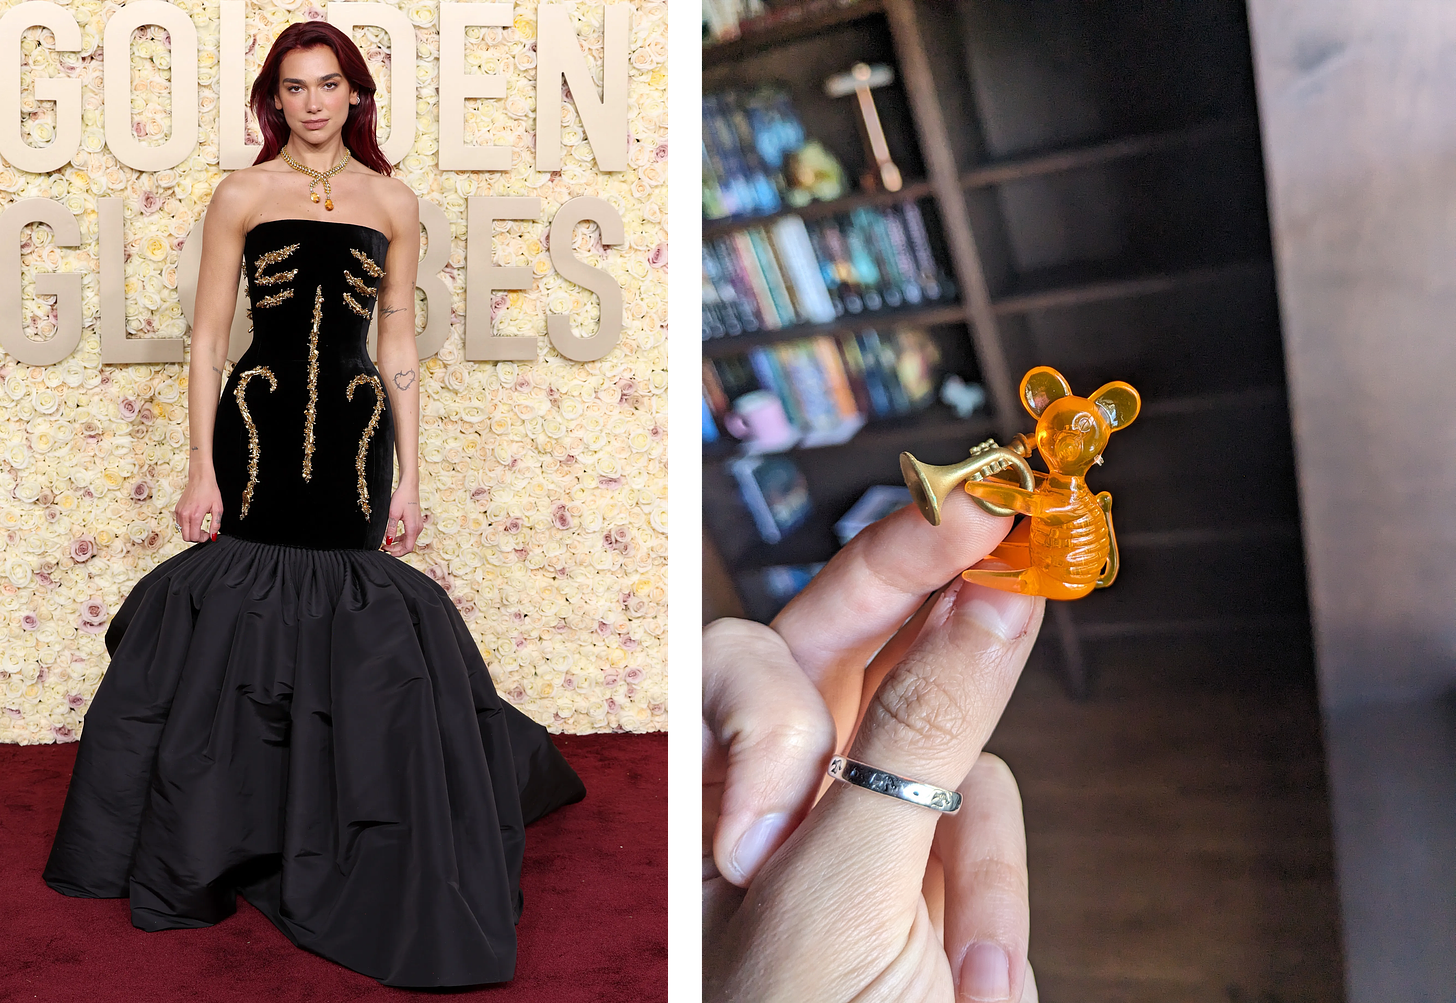 Left: Dua Lipa in a black dress that kinda looks like a cello. Right: Clear plastic orange mouse holding a gold trumpet.